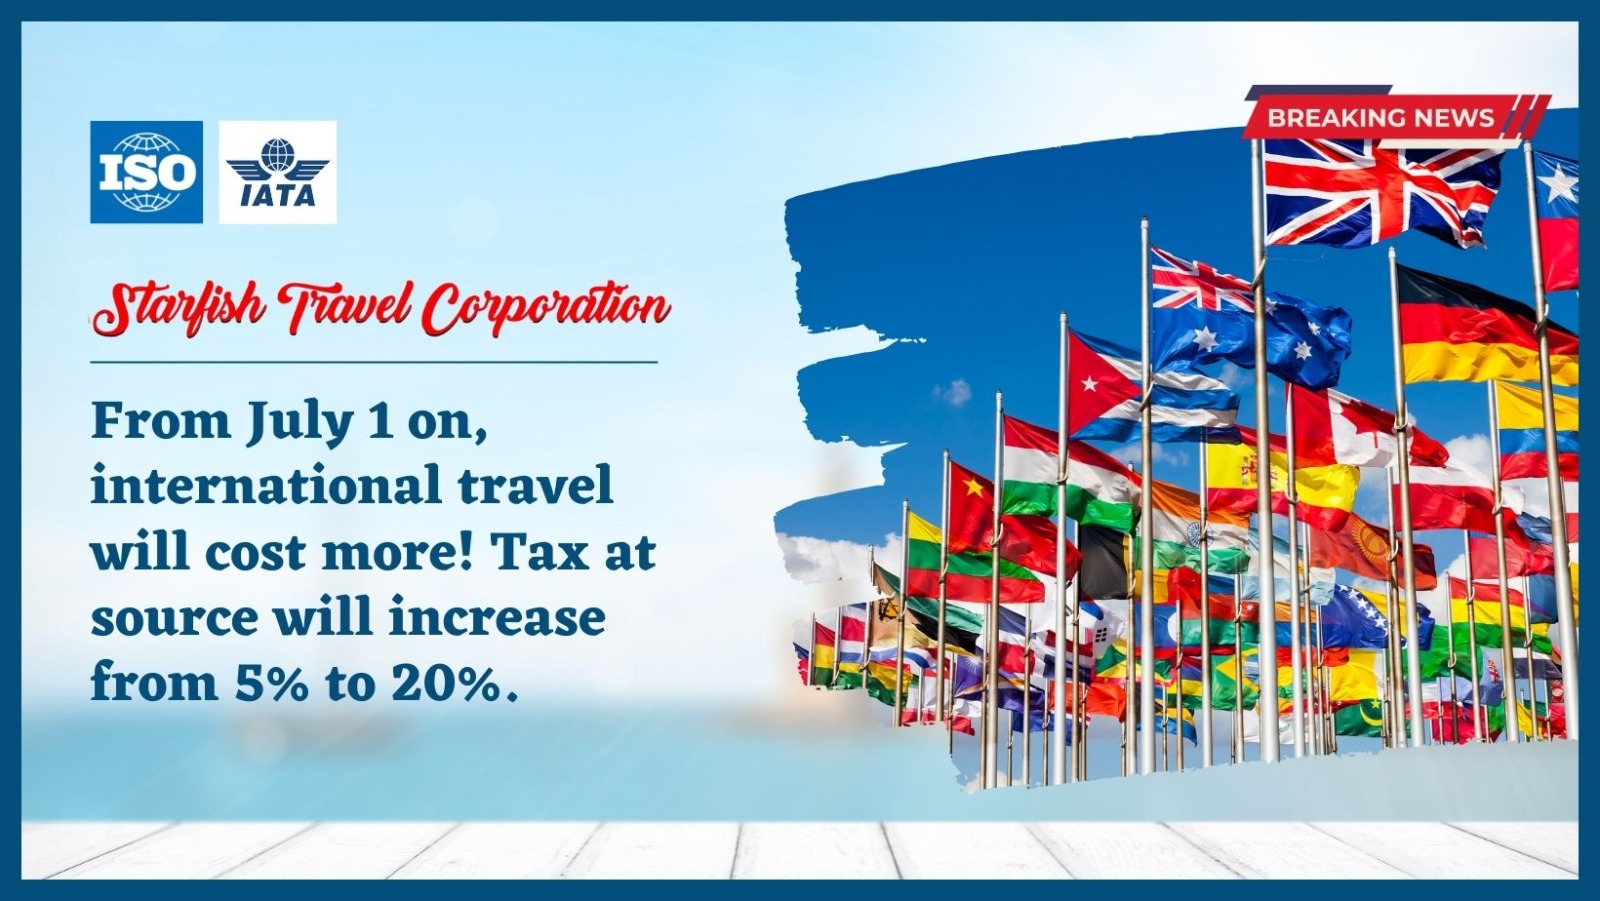 From July 1 on, international travel will cost more! Tax at source will increase from 5% to 20%.